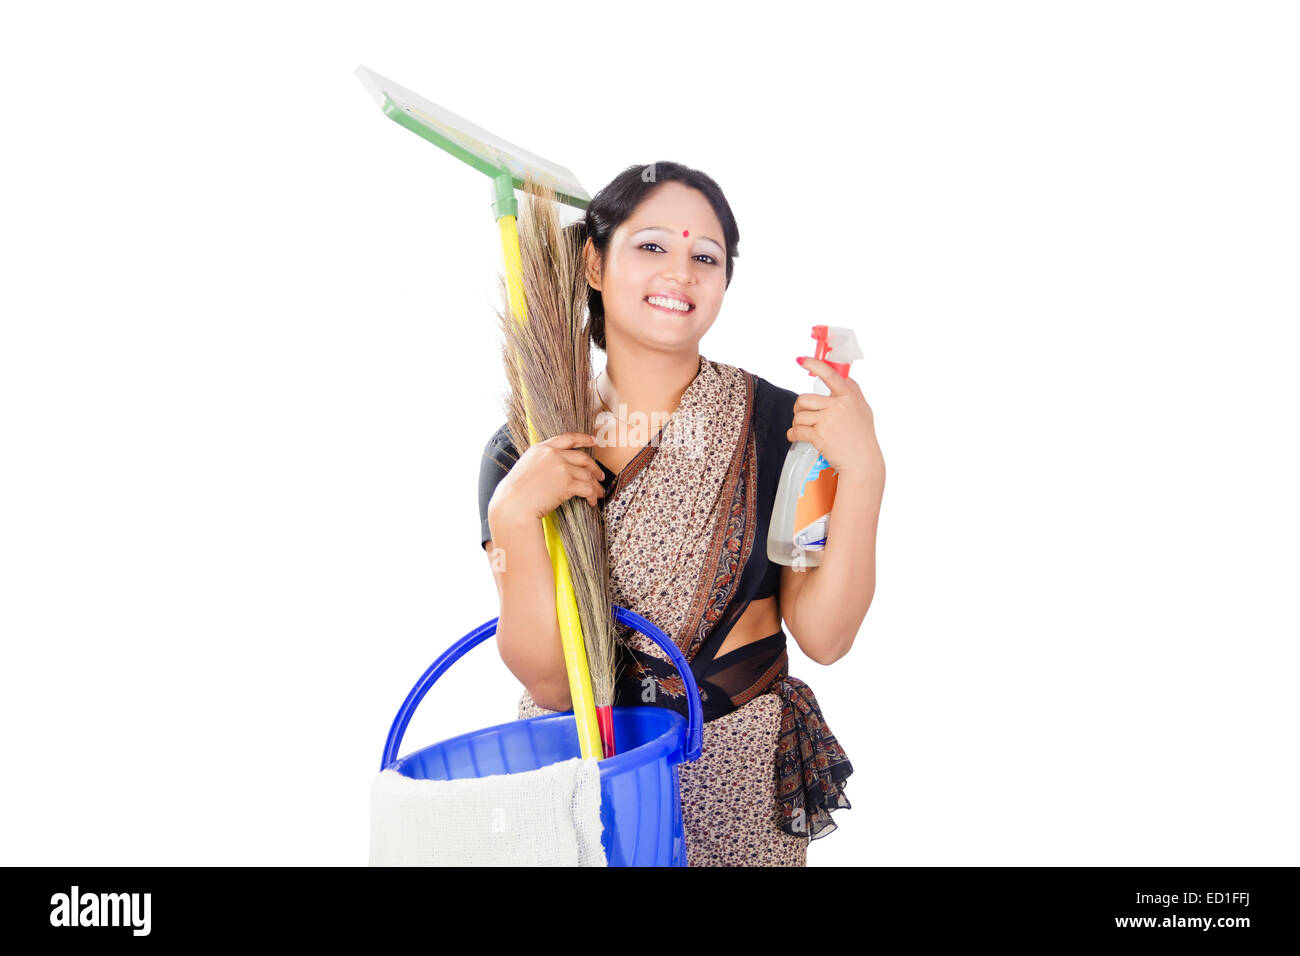 Indian Housewife Lady House Cleaning Stock Photo 76866150 Alamy